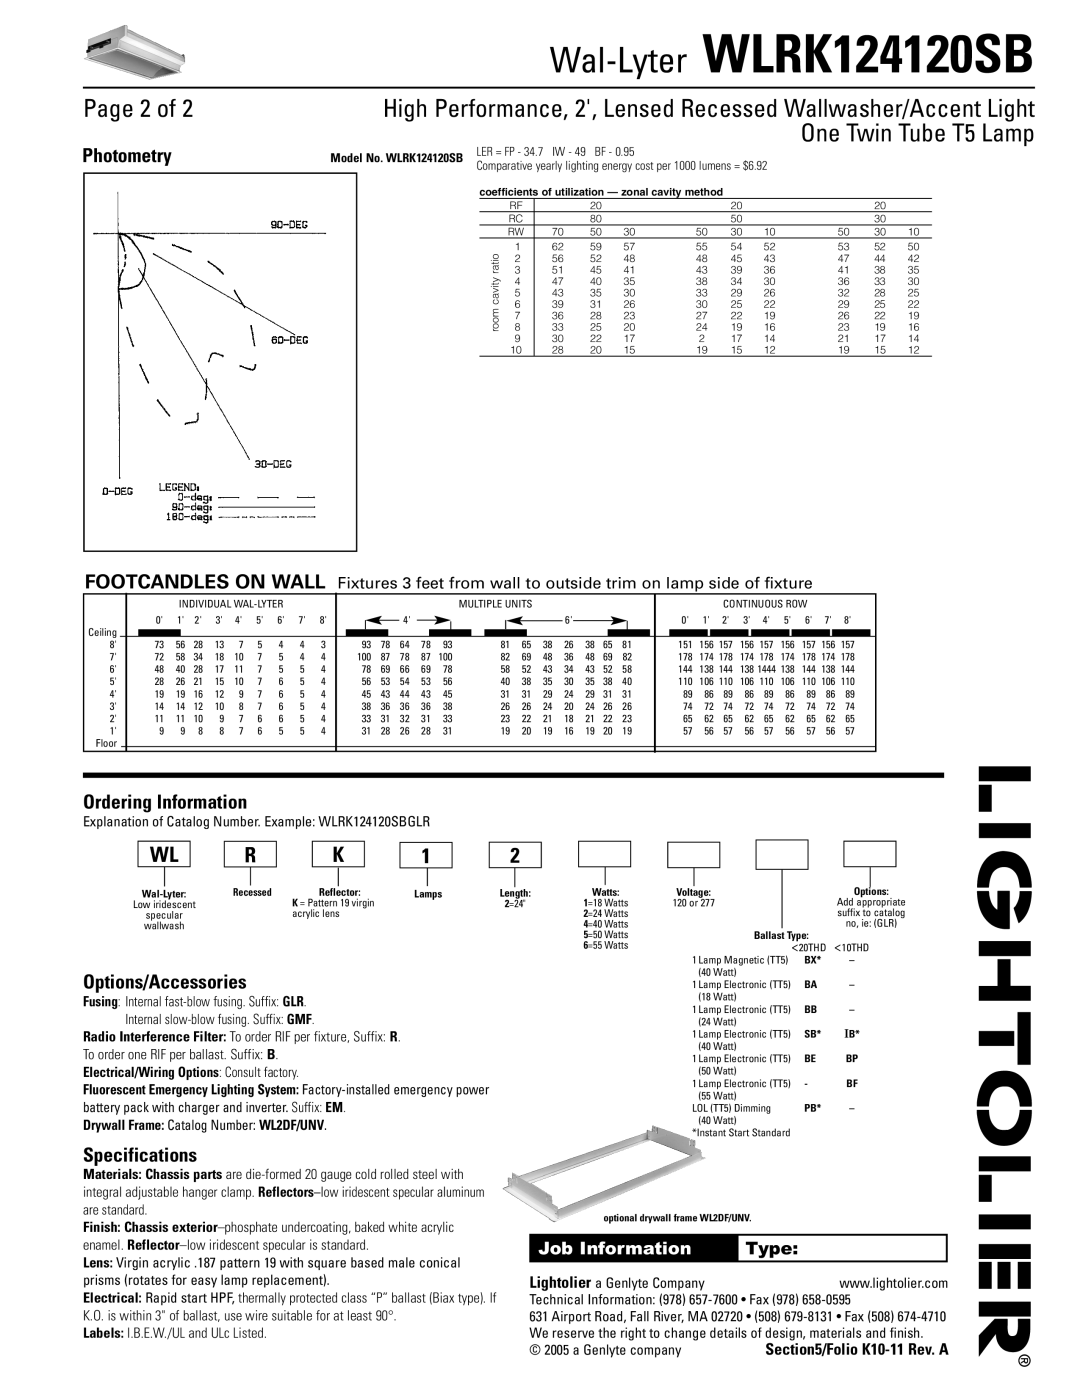 Lightolier WLRK124120SB Page 2 of, One Twin Tube T5 Lamp, Photometry, Ordering Information, Options/Accessories, Type 